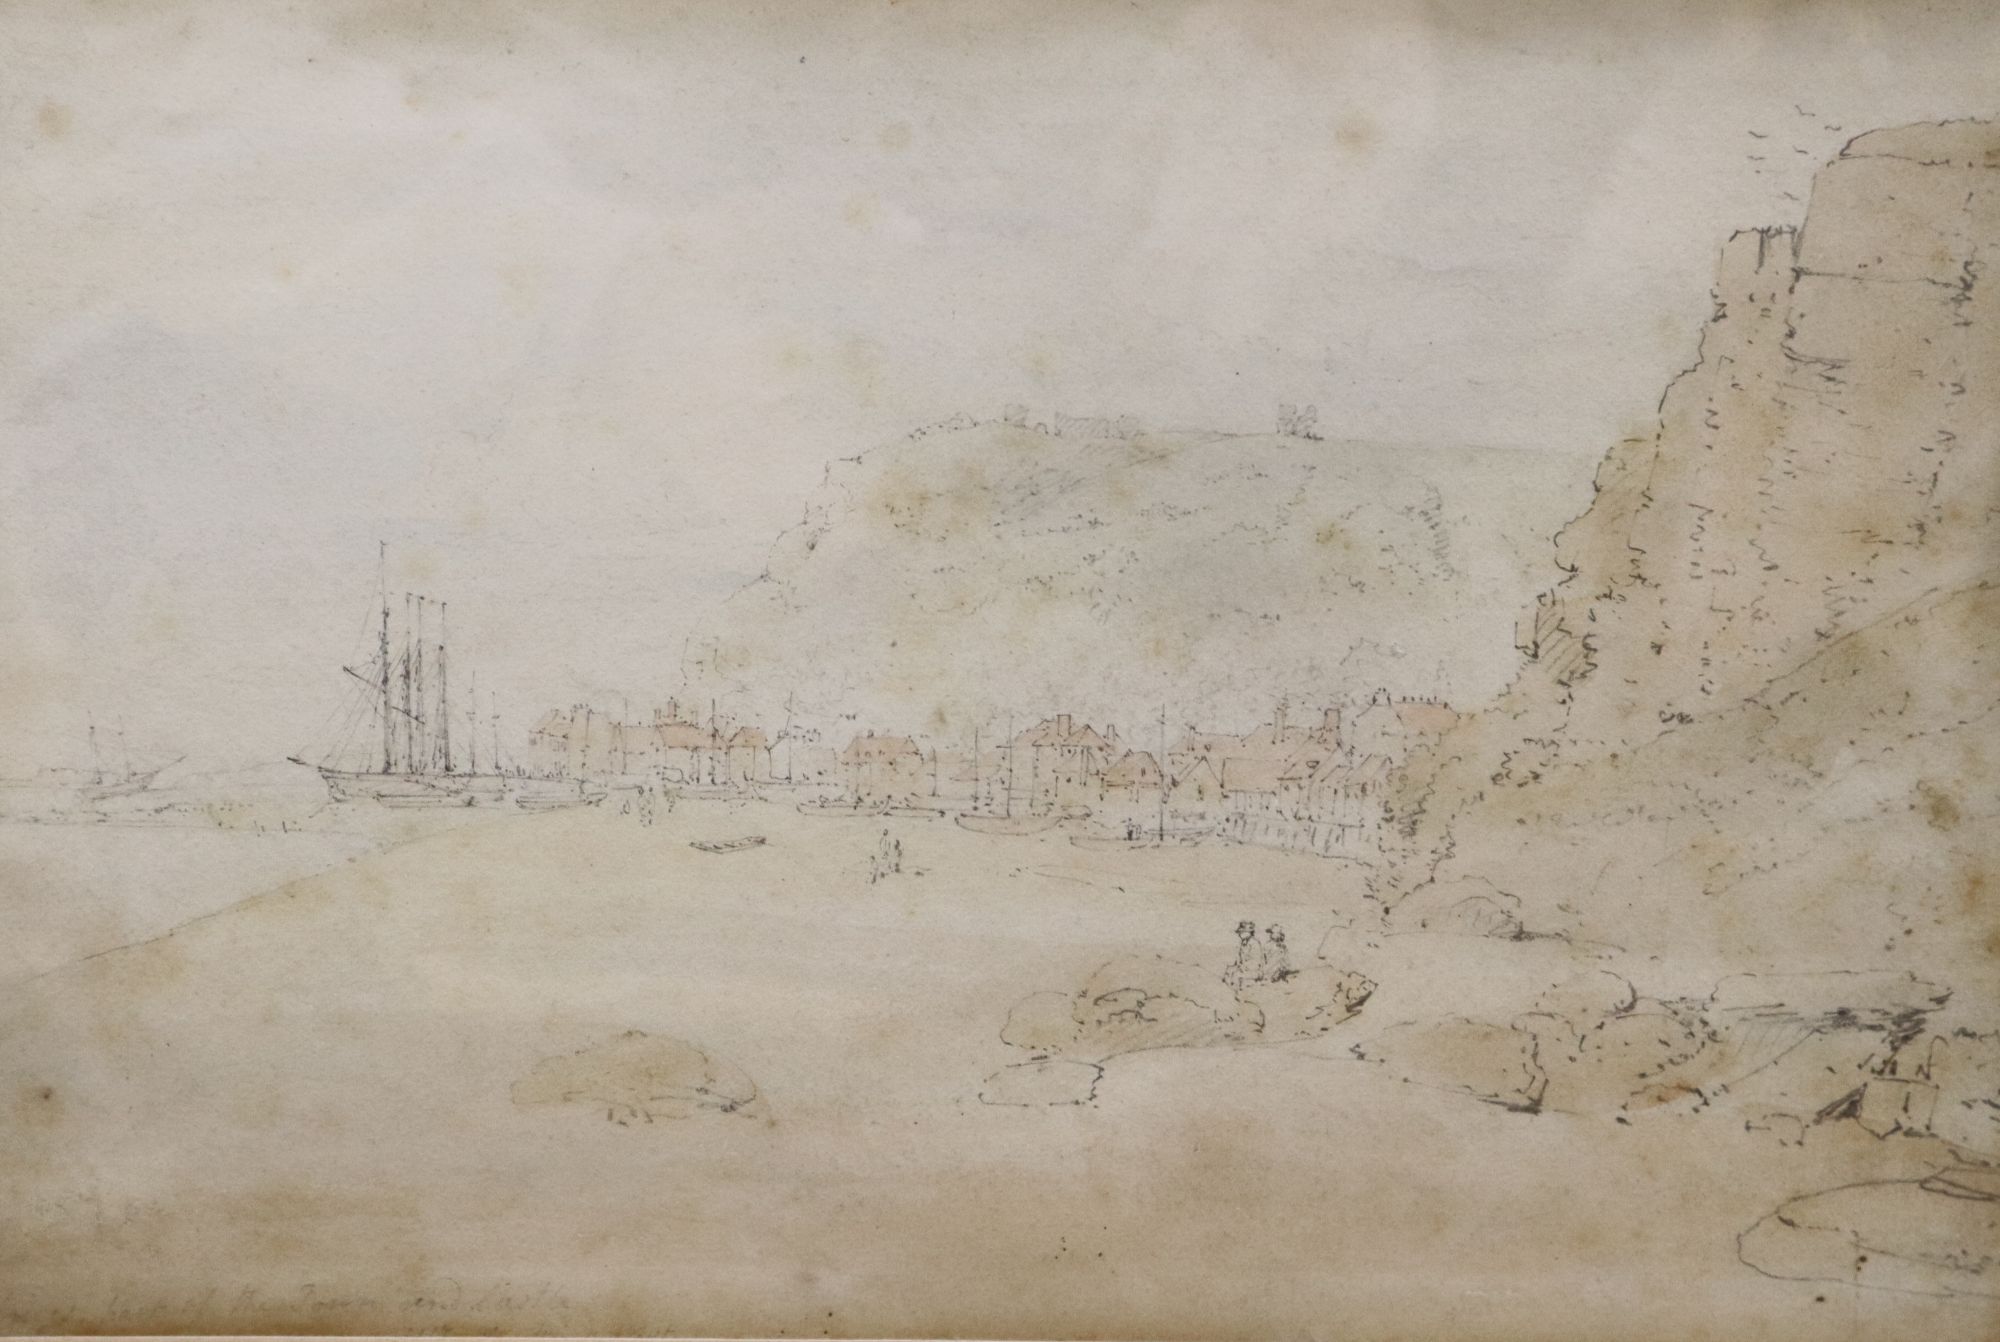 J* Roget (19th century), Hastings sea front with shipping and another of York, signed and inscribed, pencil and wash, largest 19 x 29cm